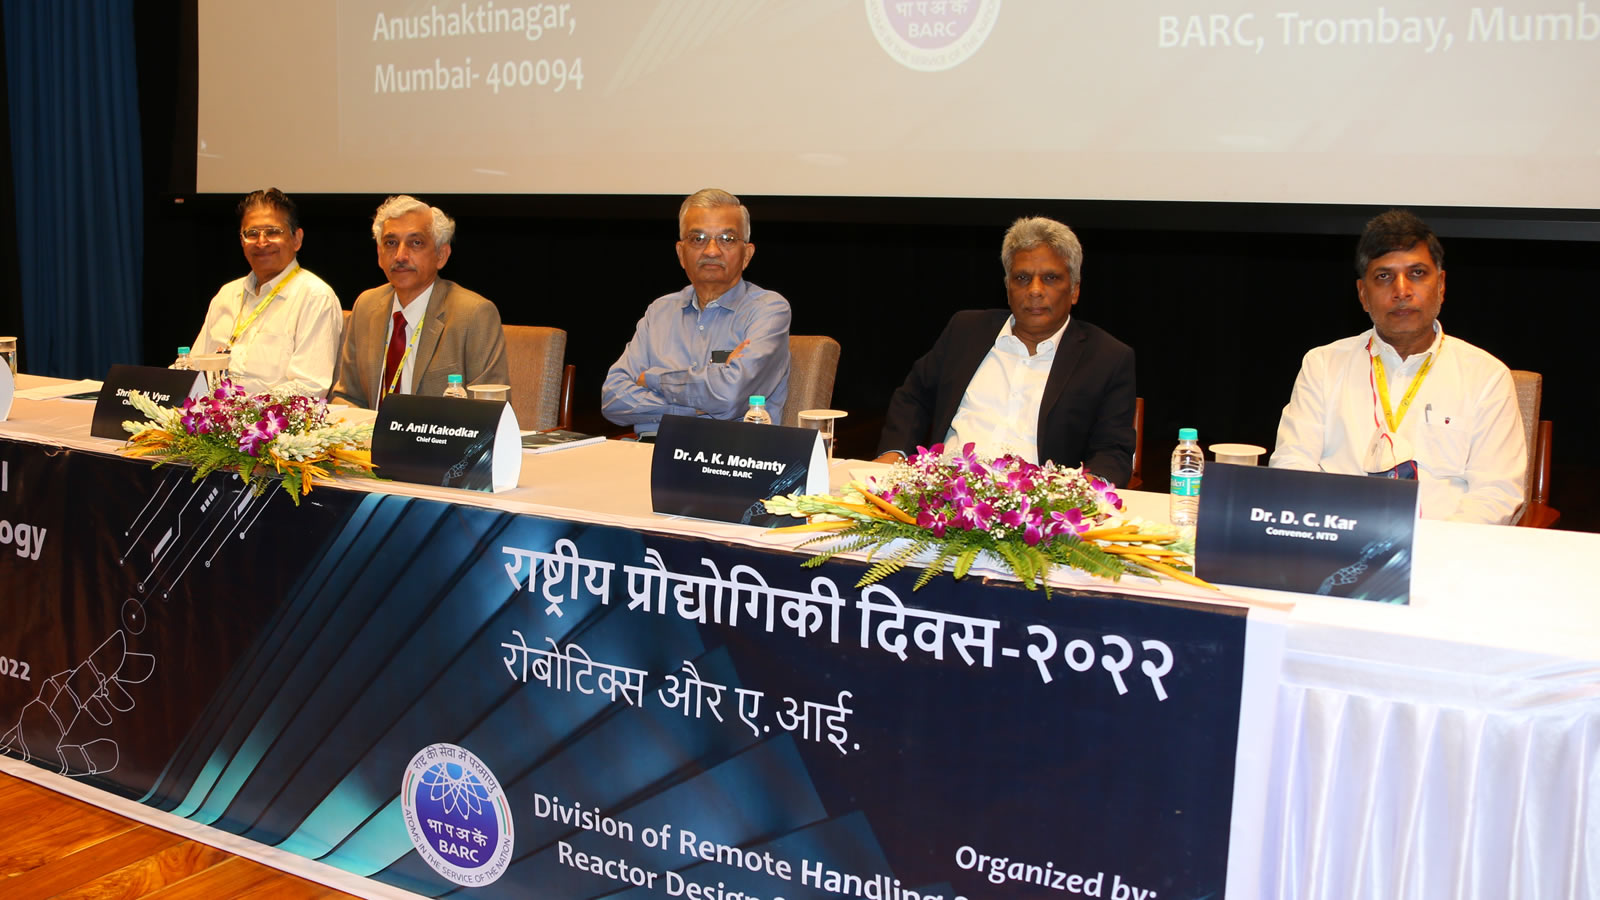 National Technology Day 2022 function at BARC